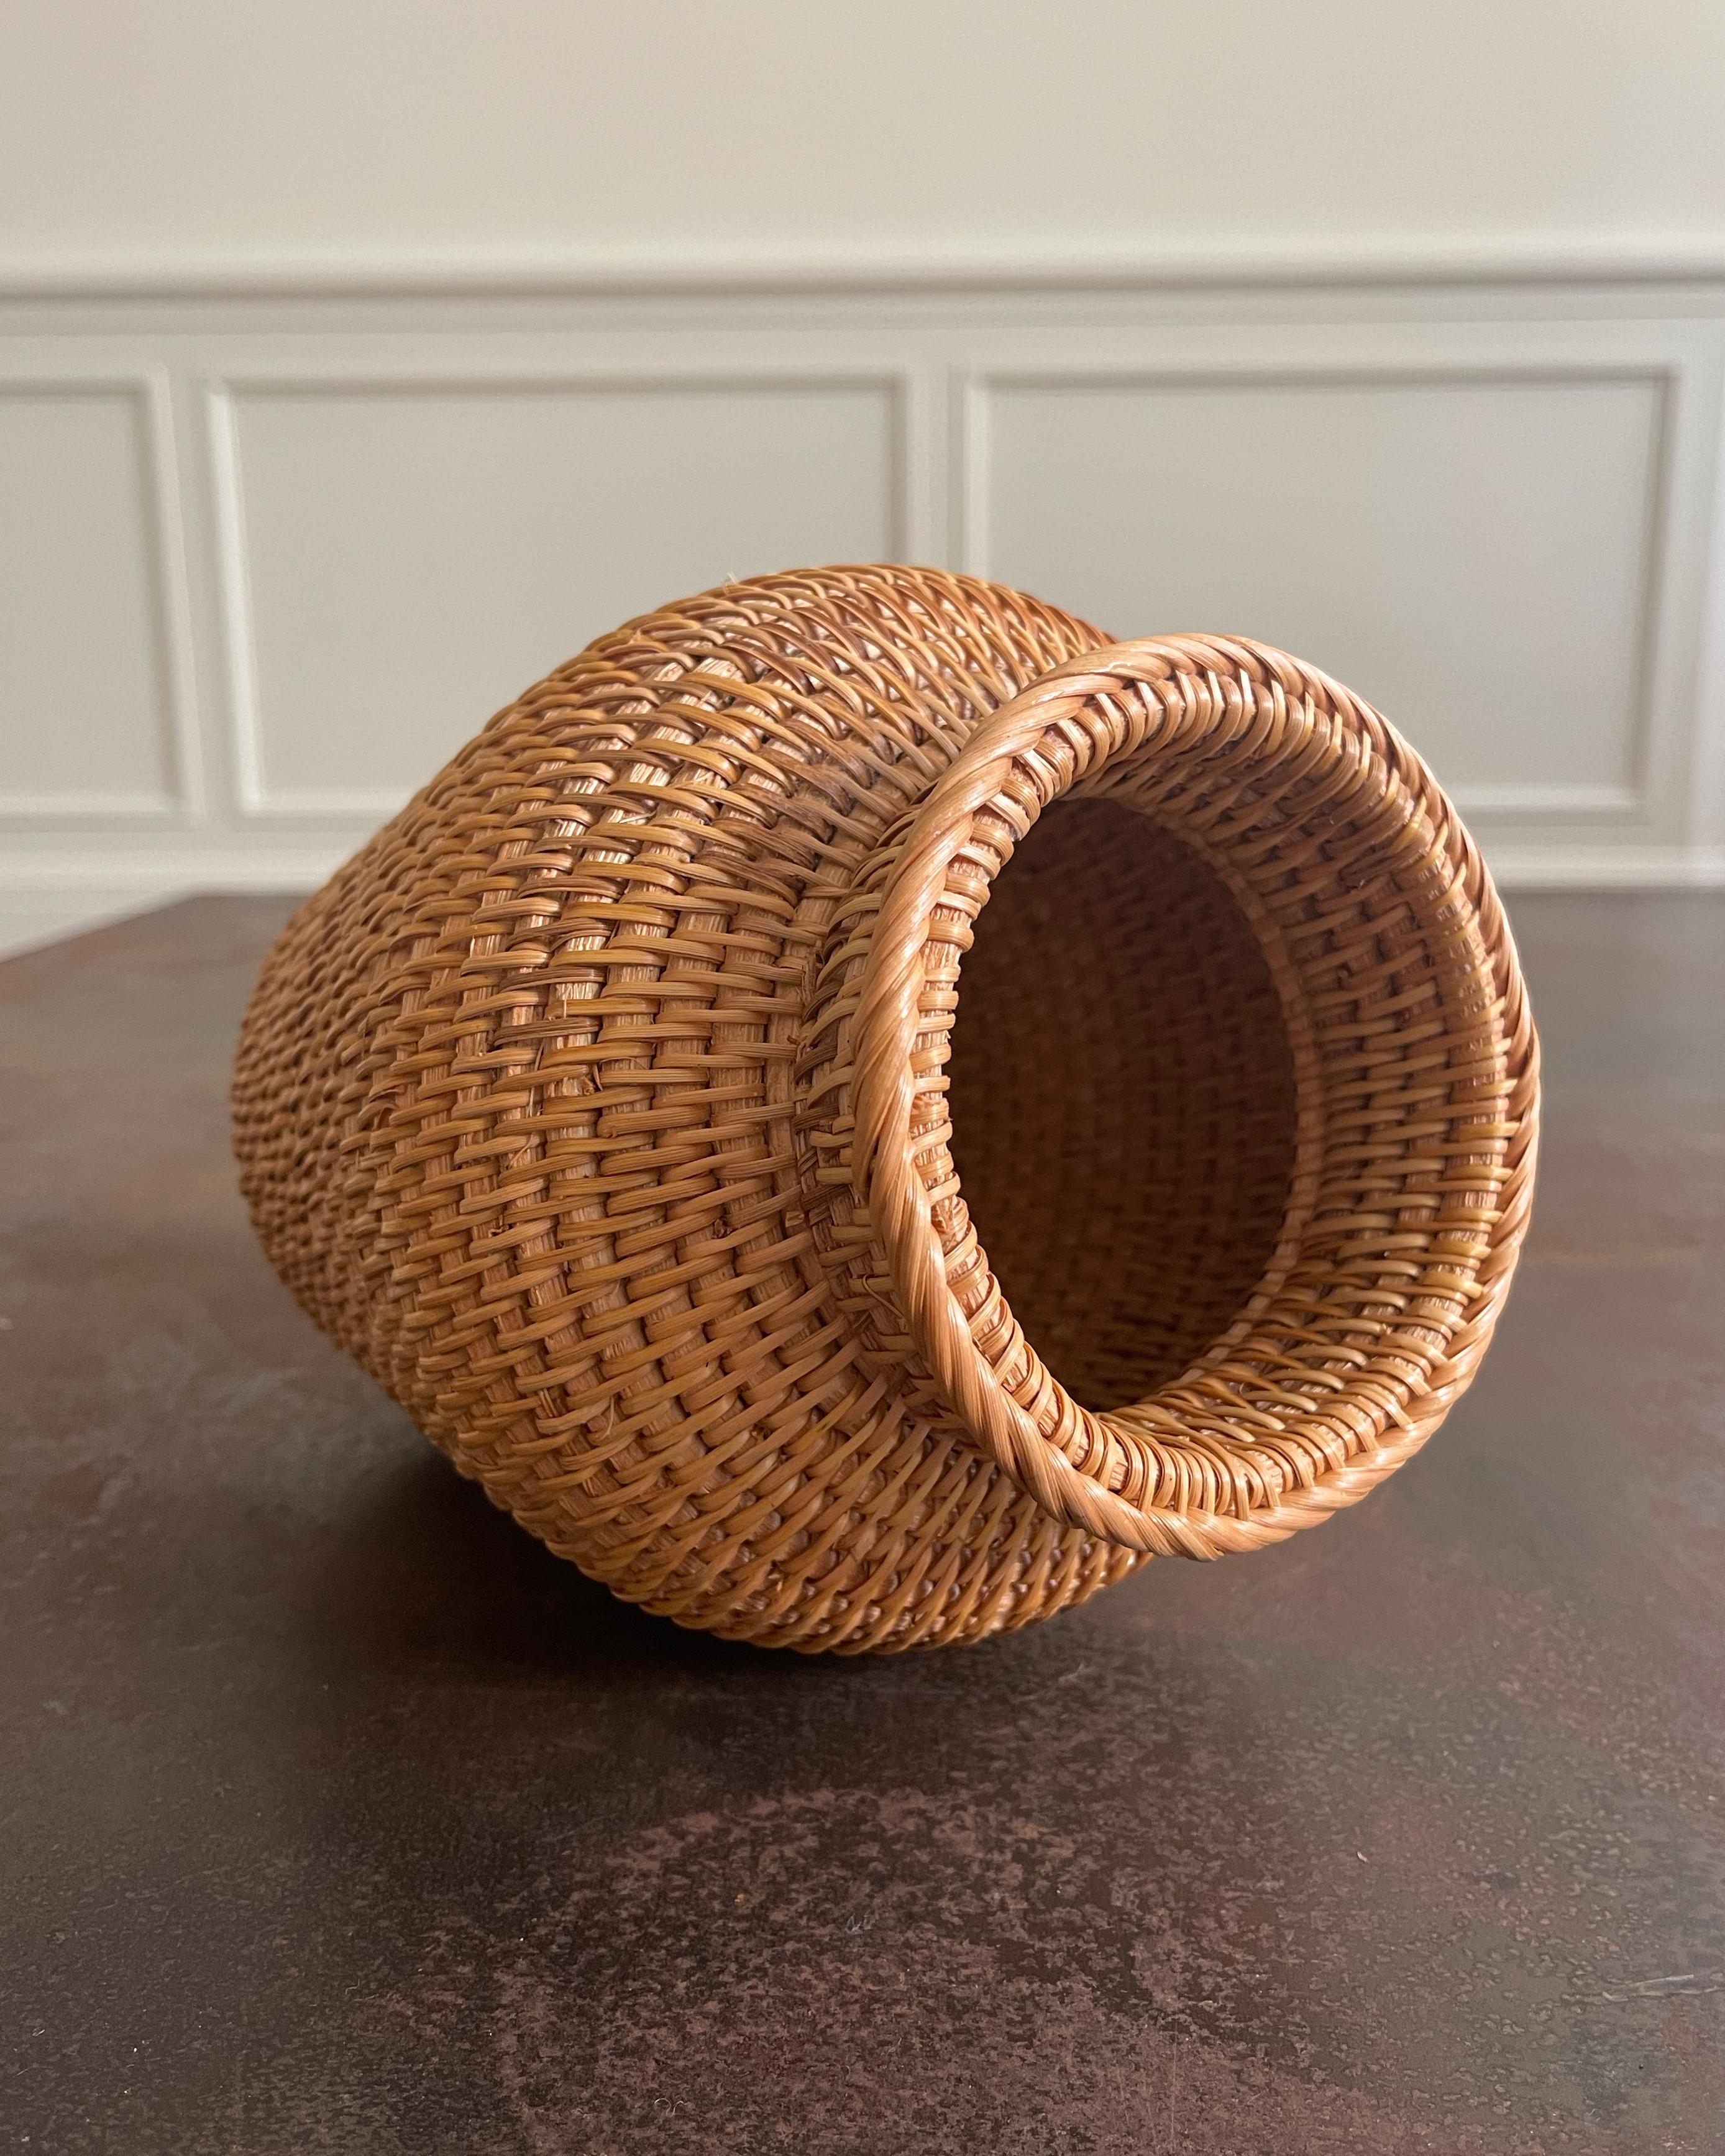 A classic handwoven rattan decorative vase. Non-coated finish. For Artificial Flower or Dry Flower use only.

Dimensions:
- 3.25